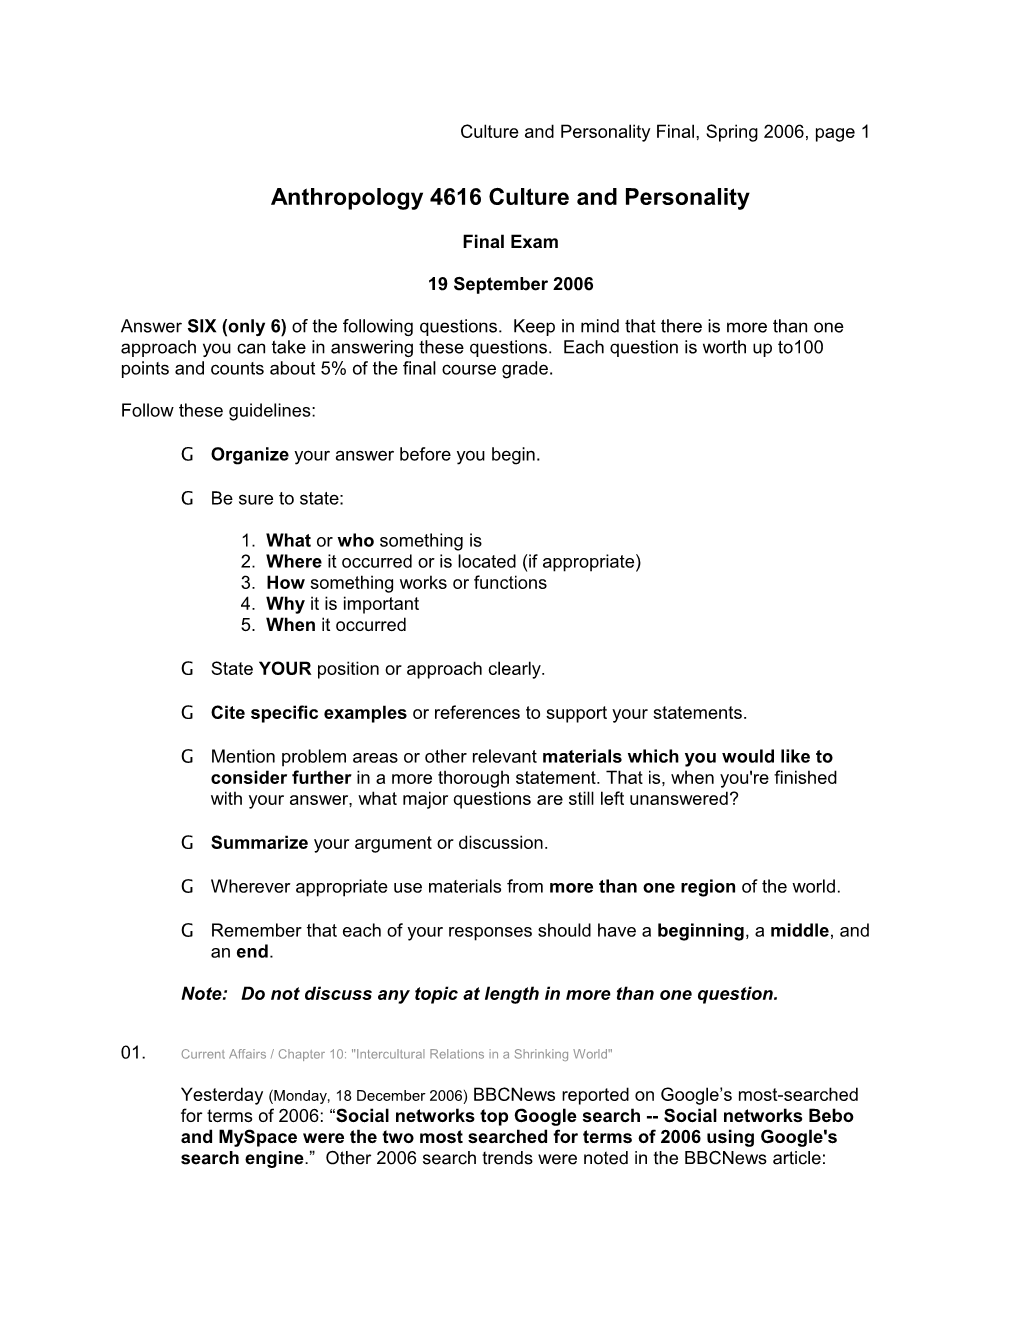 Culture and Personality Final, Spring 2006, Page 9